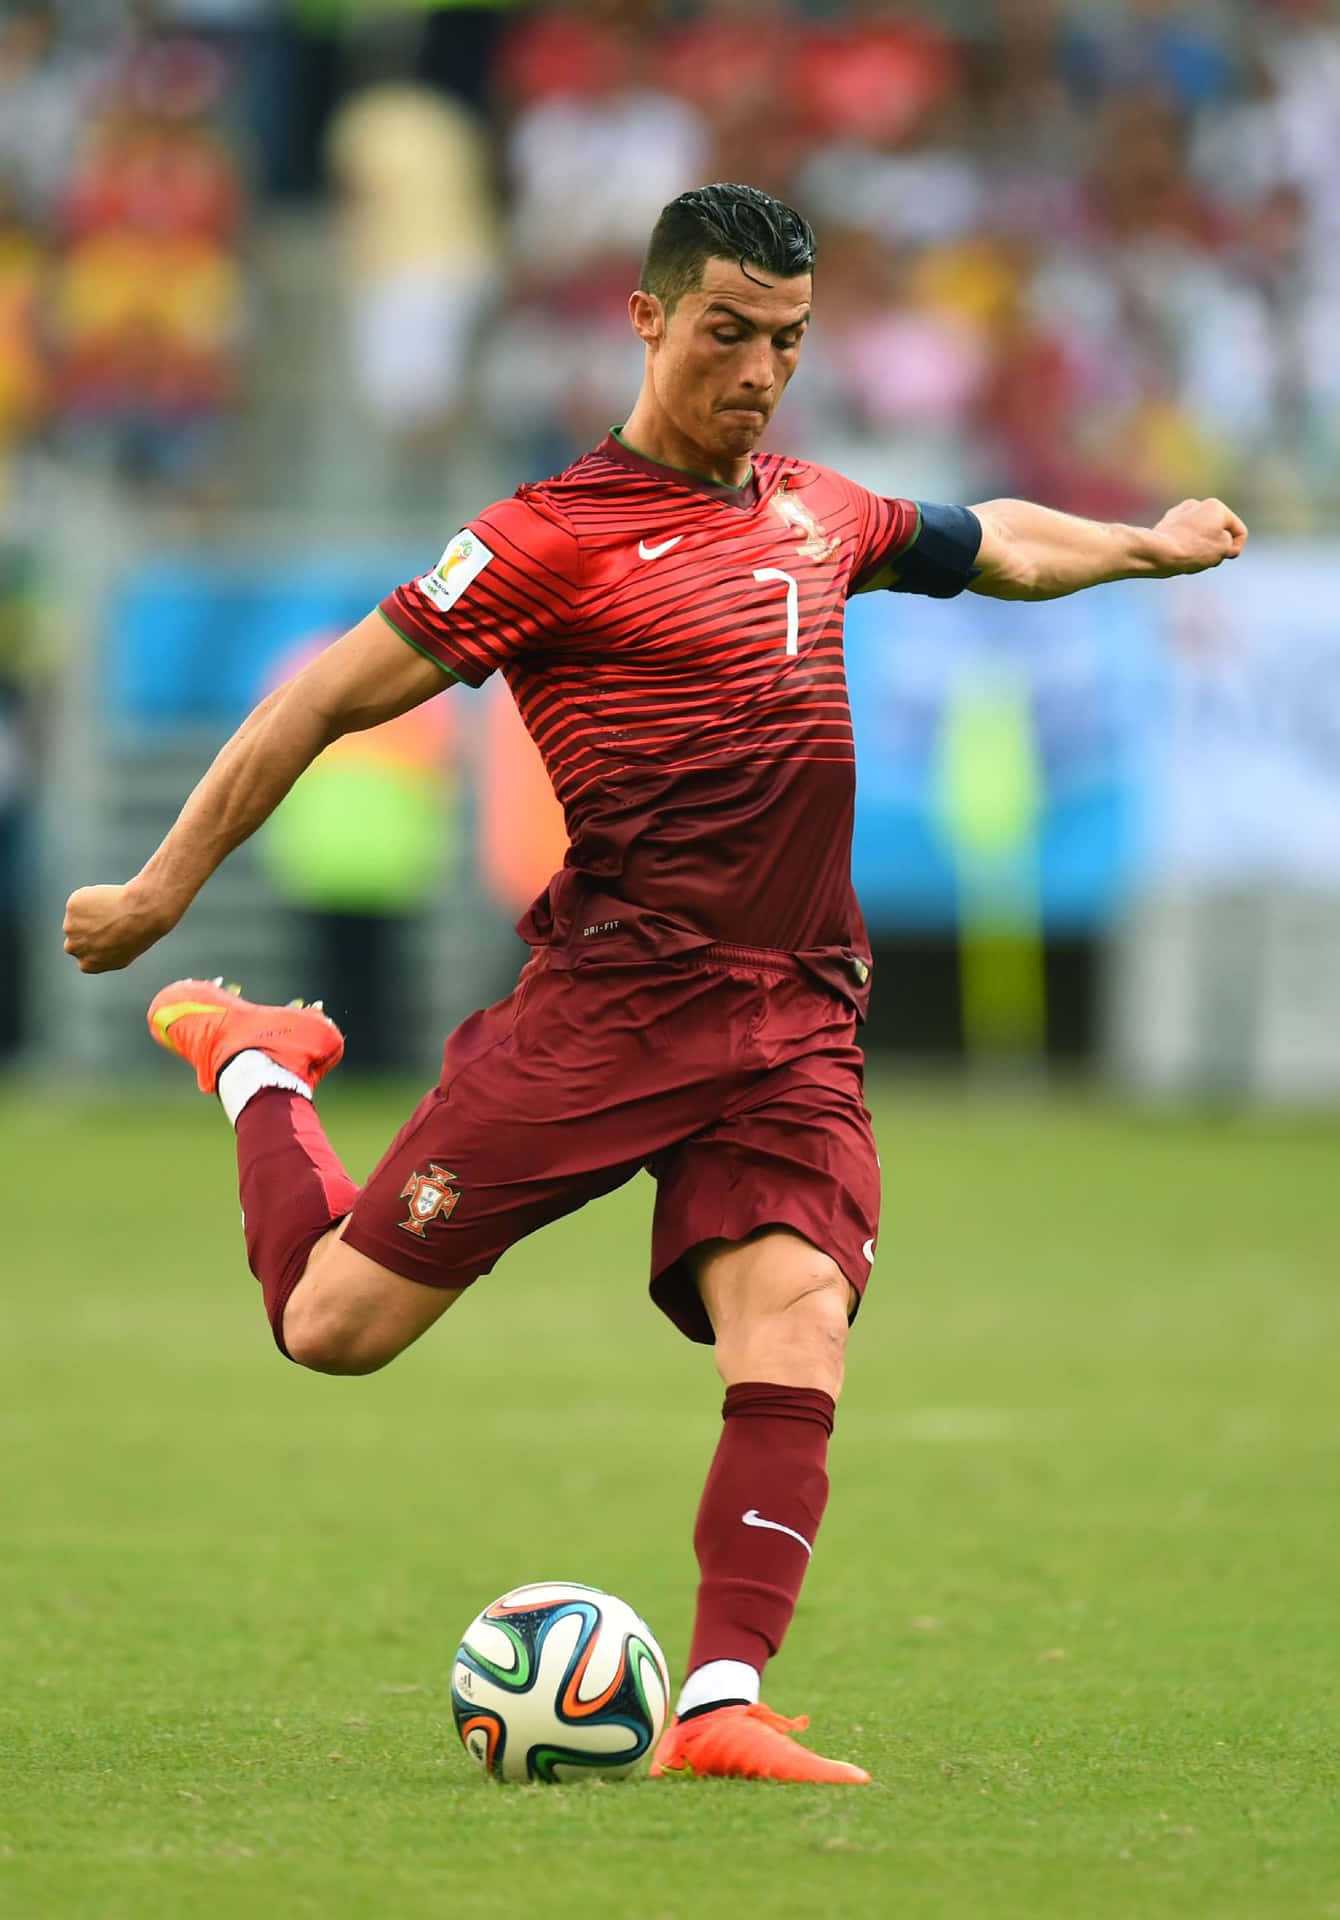 Cristiano Ronaldo in action on the field